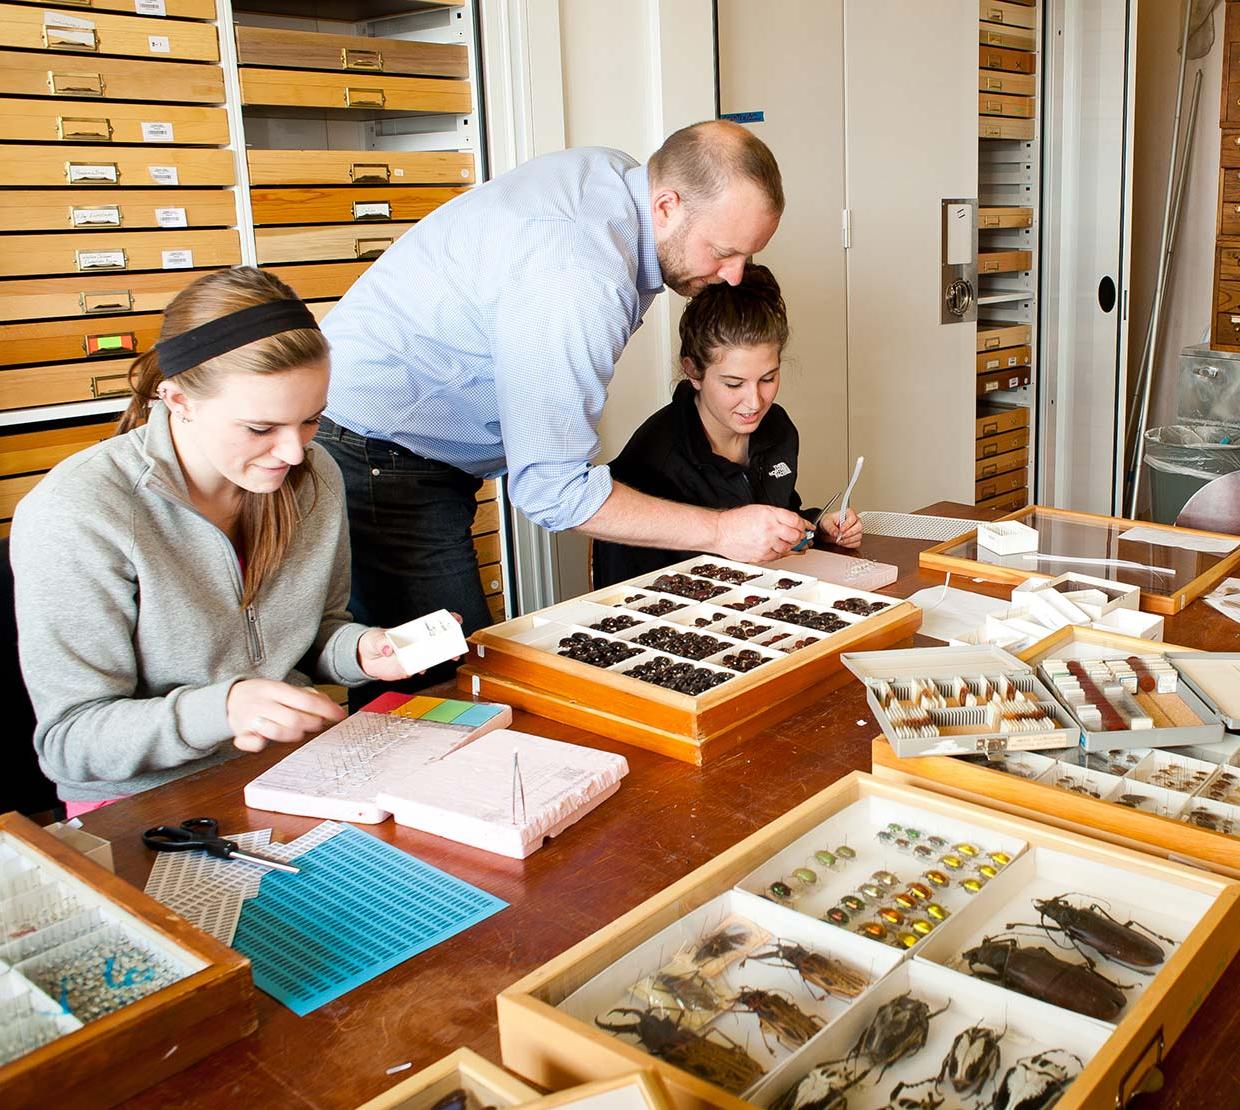 Chris Marshall and student analyzing insect collection